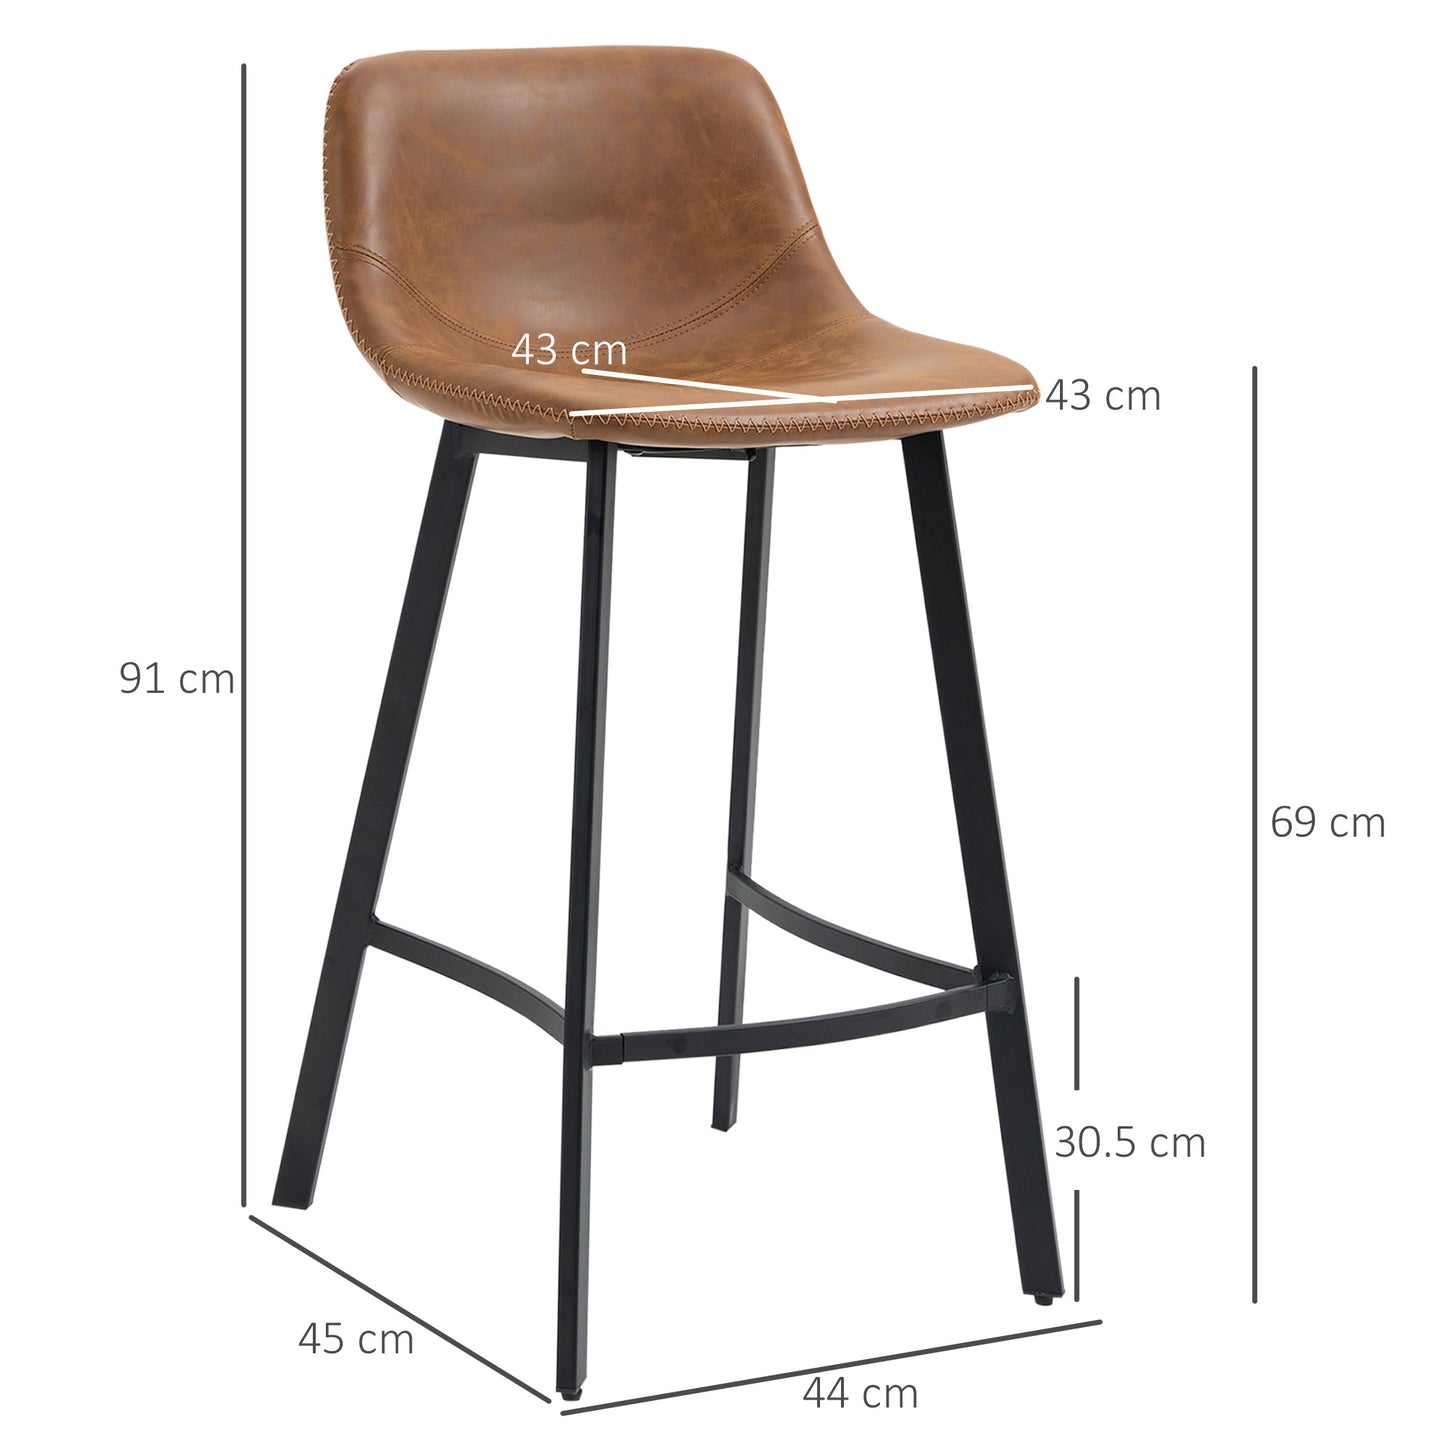 HOMCOM Bar Stools Set of 2, Industrial Kitchen Stool, Upholstered Bar Chairs with Back, Steel Legs, Brown